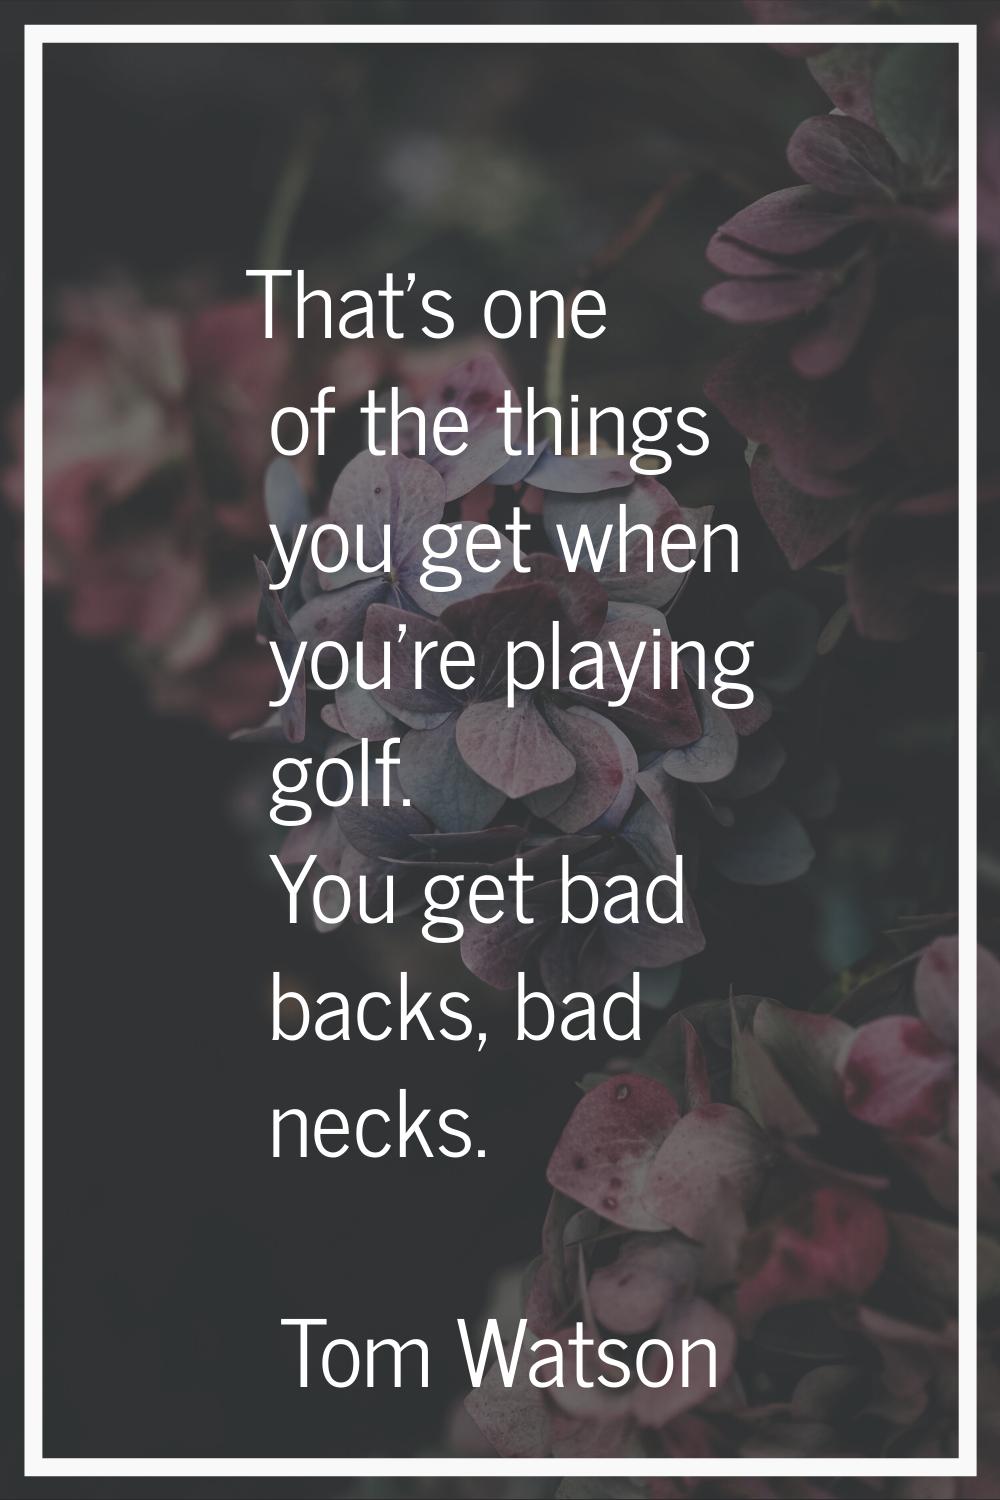 That's one of the things you get when you're playing golf. You get bad backs, bad necks.